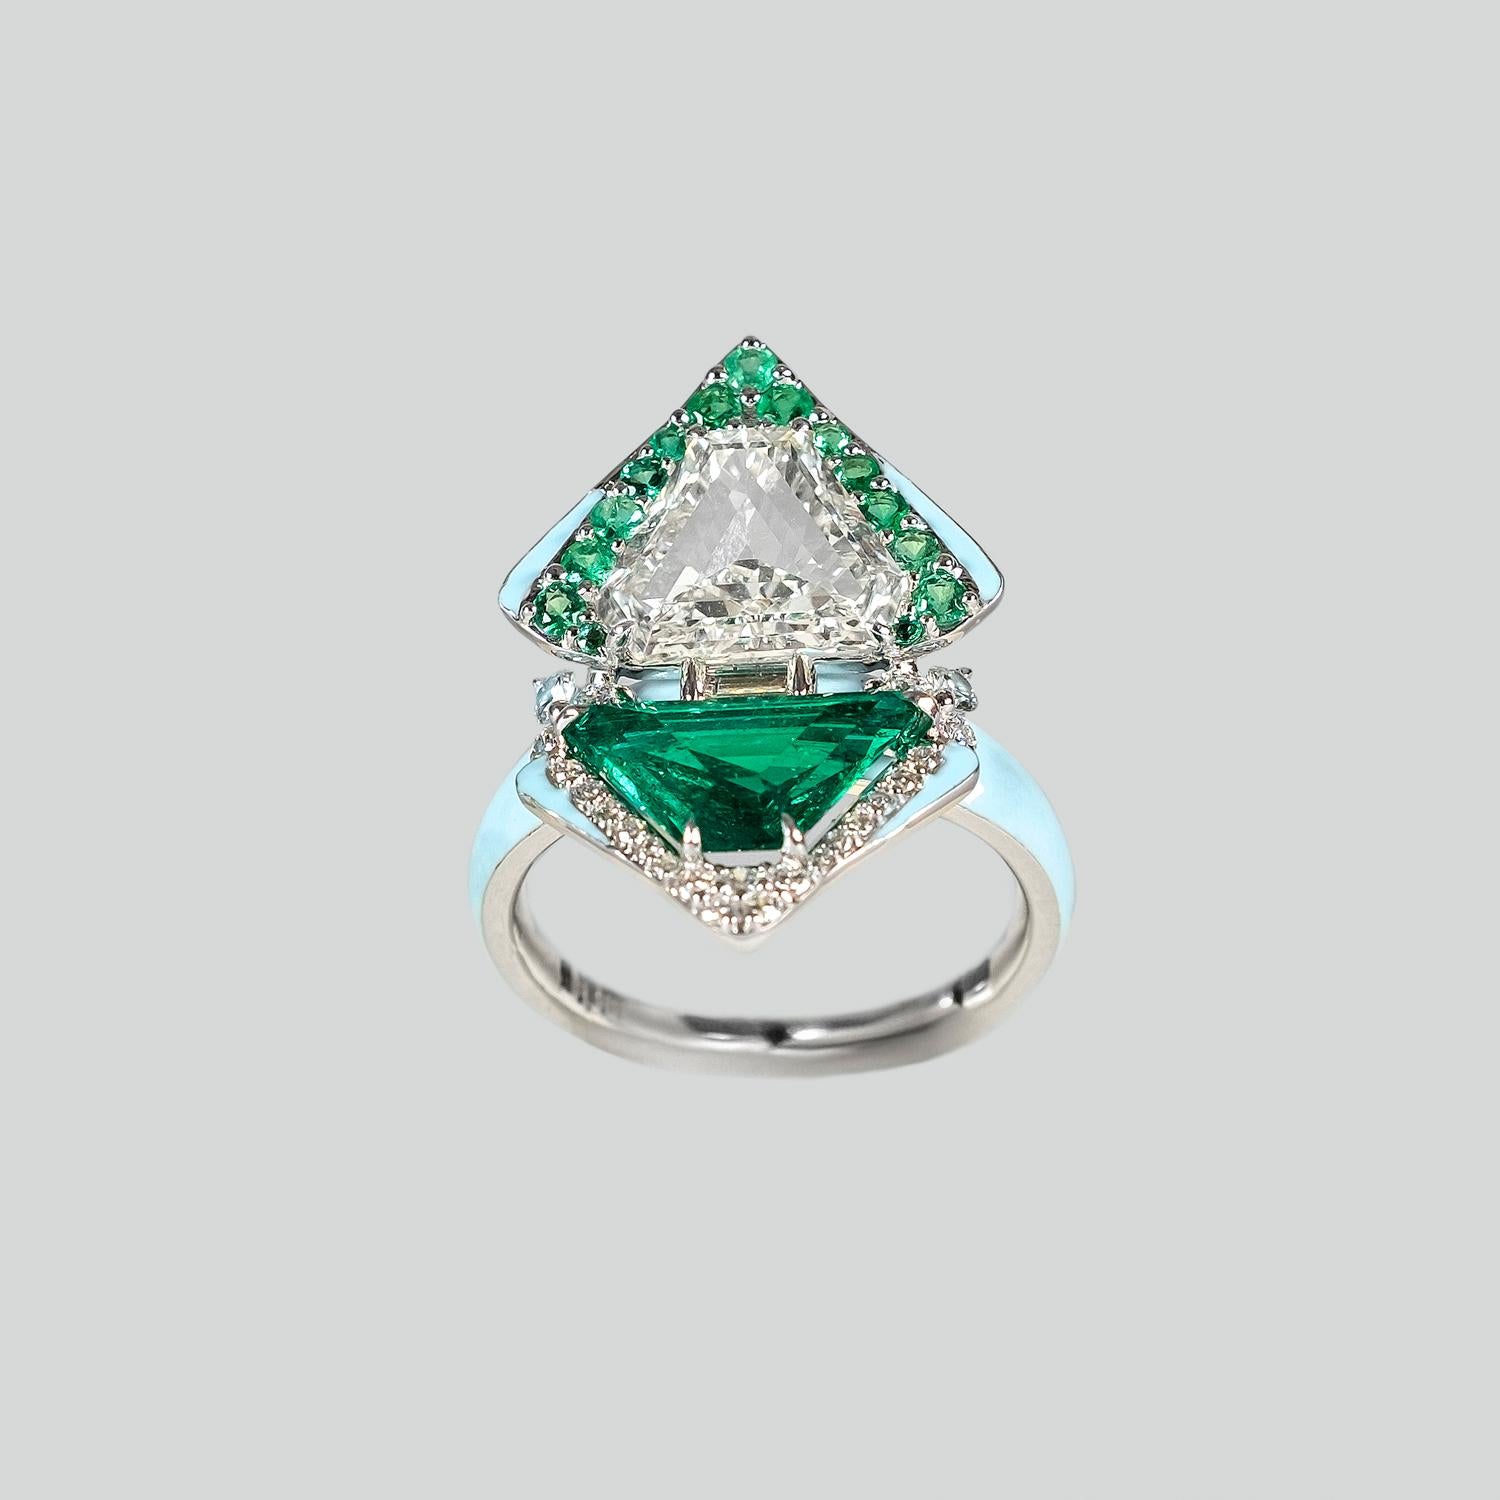 2.00 Carat each Colombian Emerald & Diamond Paired Shield Cut Ring. Accented with contrasting Pave setting diamond and Emeralds. Made with 6.55 grams of 18K White Gold.

This is a one-of-a-kind Kamyen Piece!